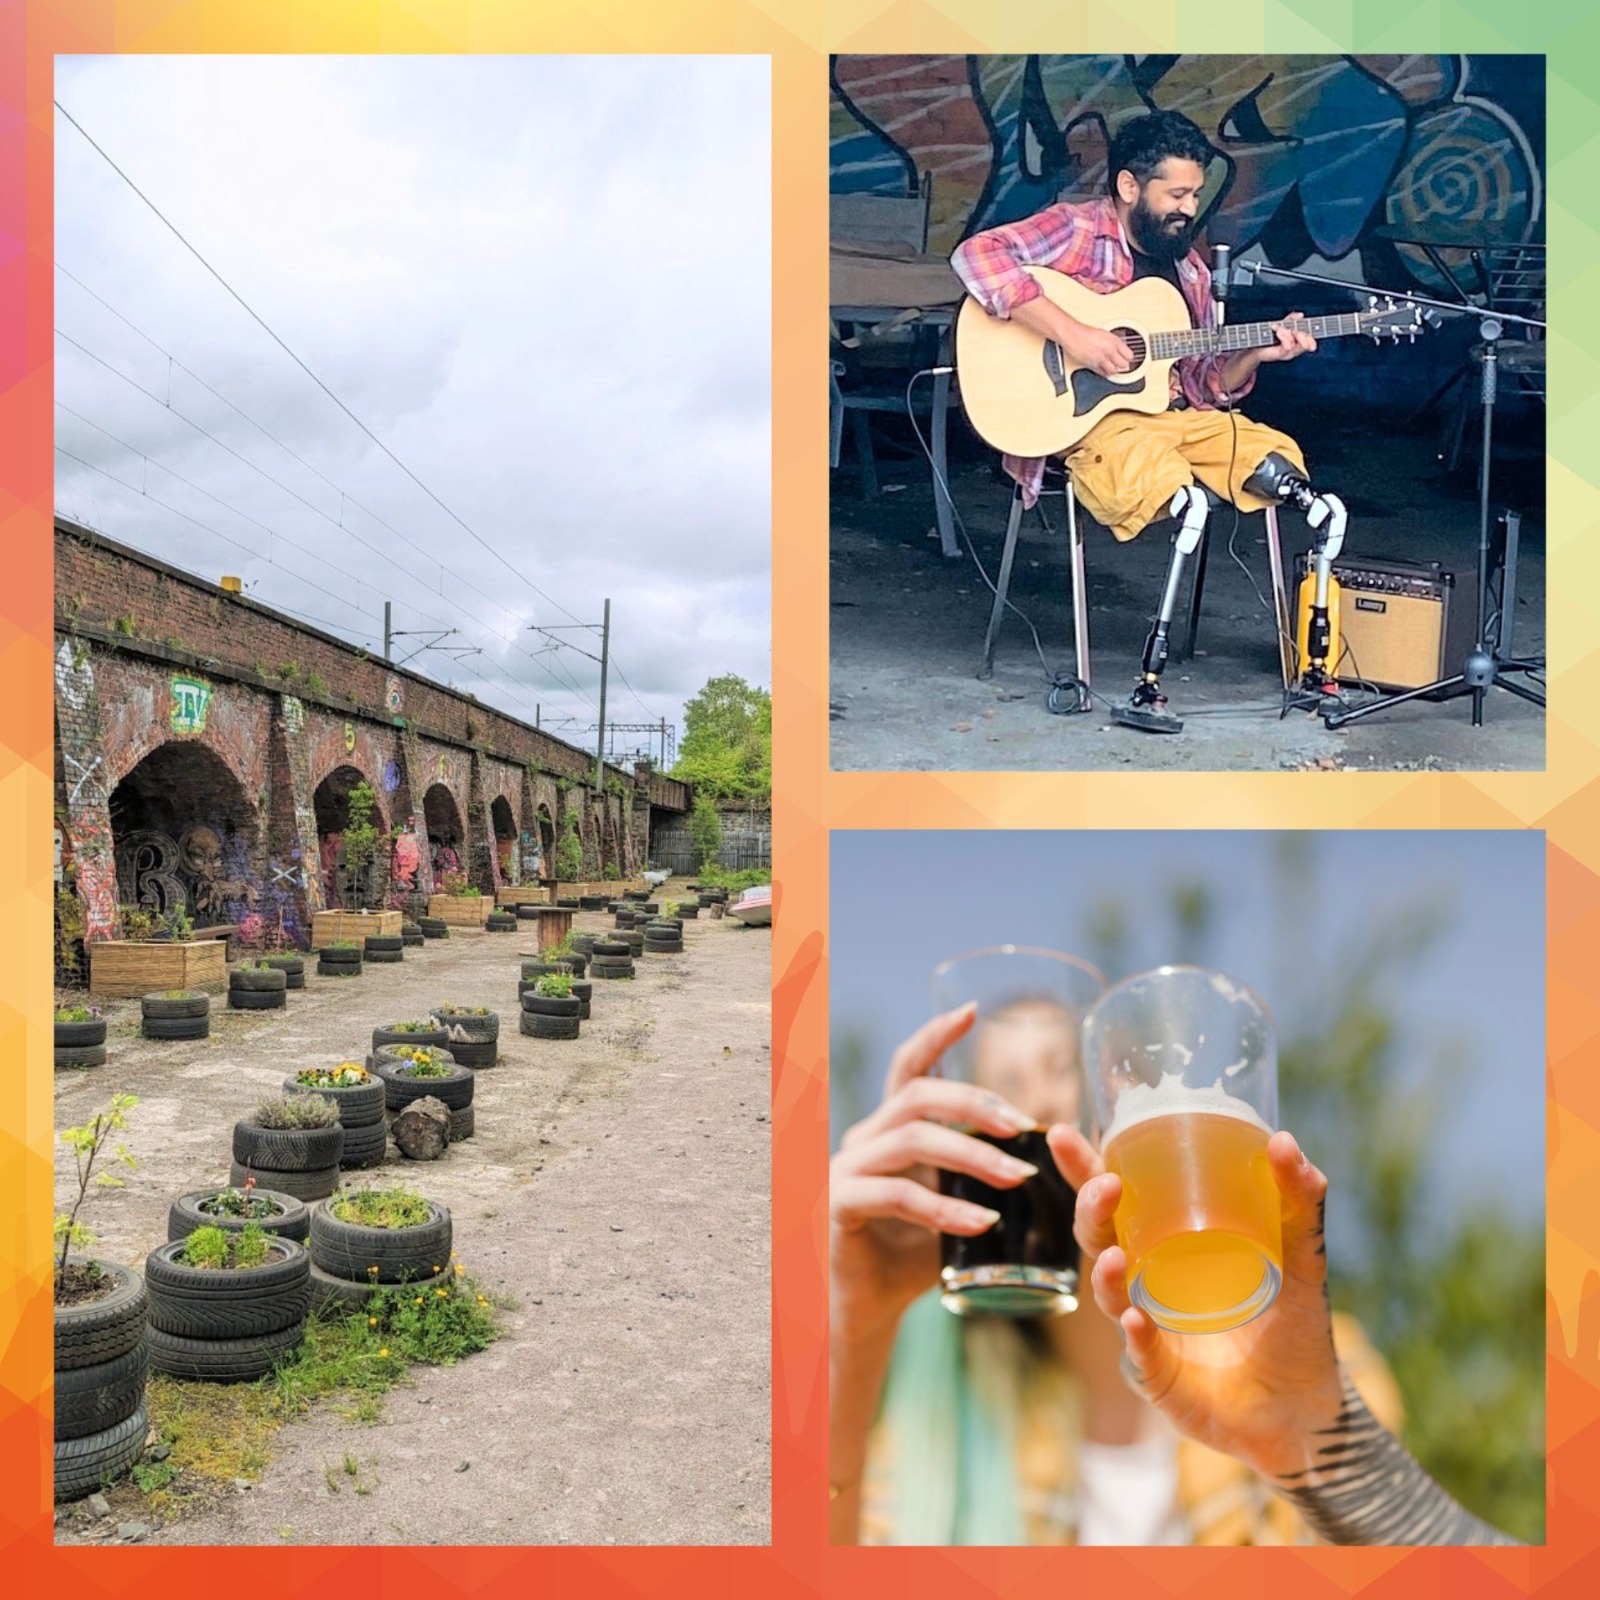 Festival Promotional image with a picture of the garden event venue, Paul playing guitar, and two people giving each other a cheers with drinks